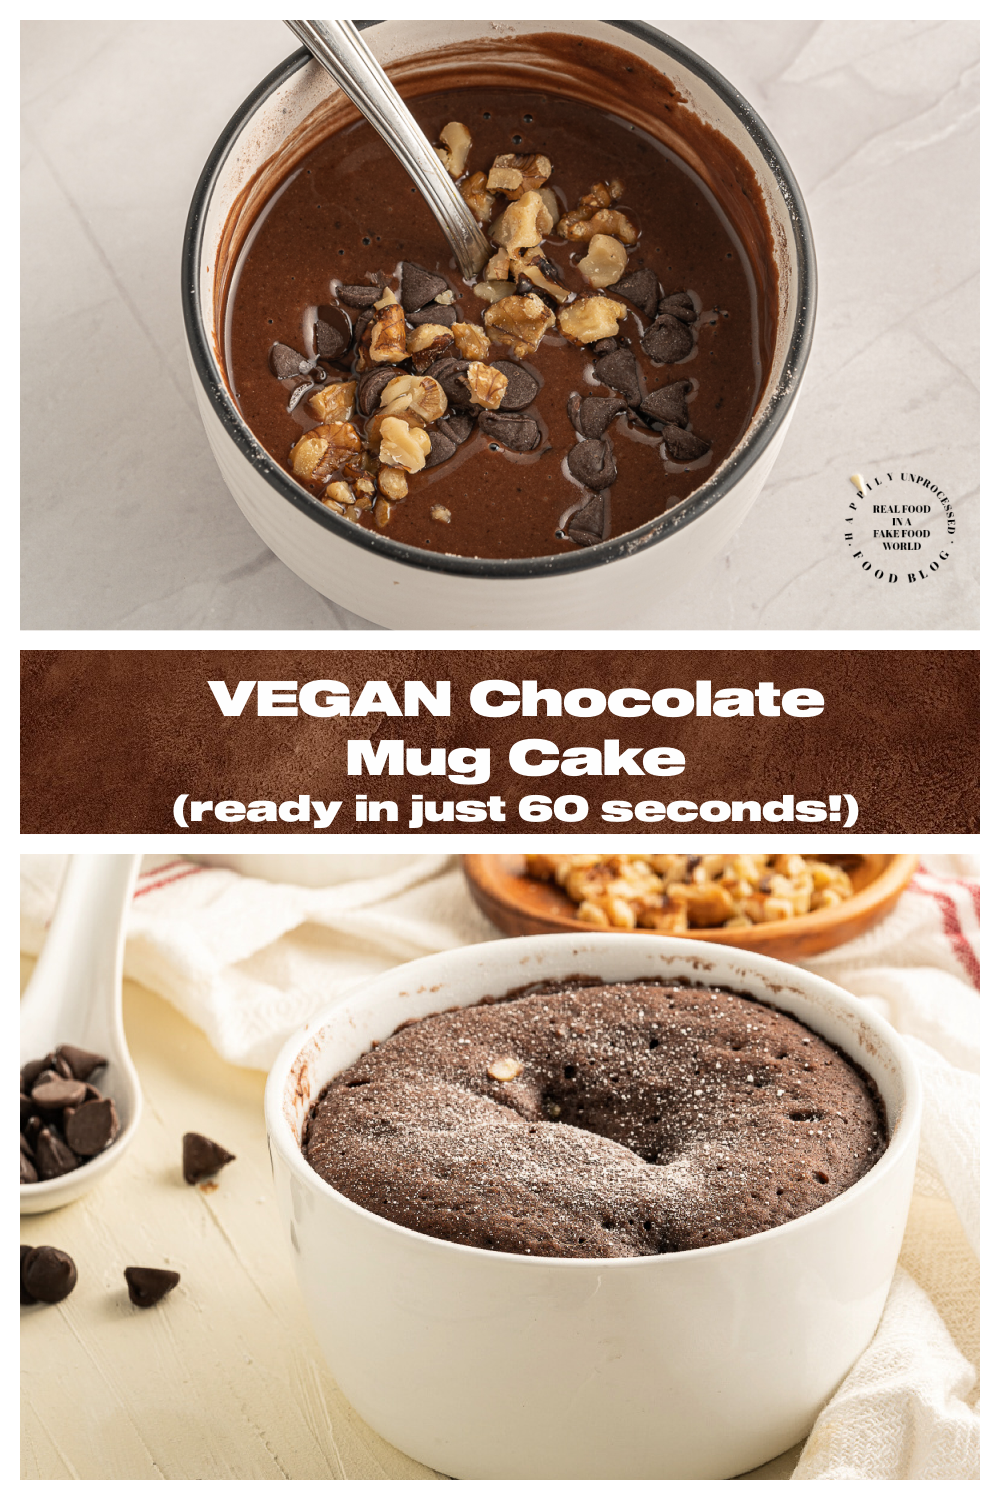 A Vegan Chocolate Mug Cake thats ready in just 60 seconds in the microwave mugcake vegandesserts - Vegan Chocolate Brownie Mug Cake - ready in 60 seconds!